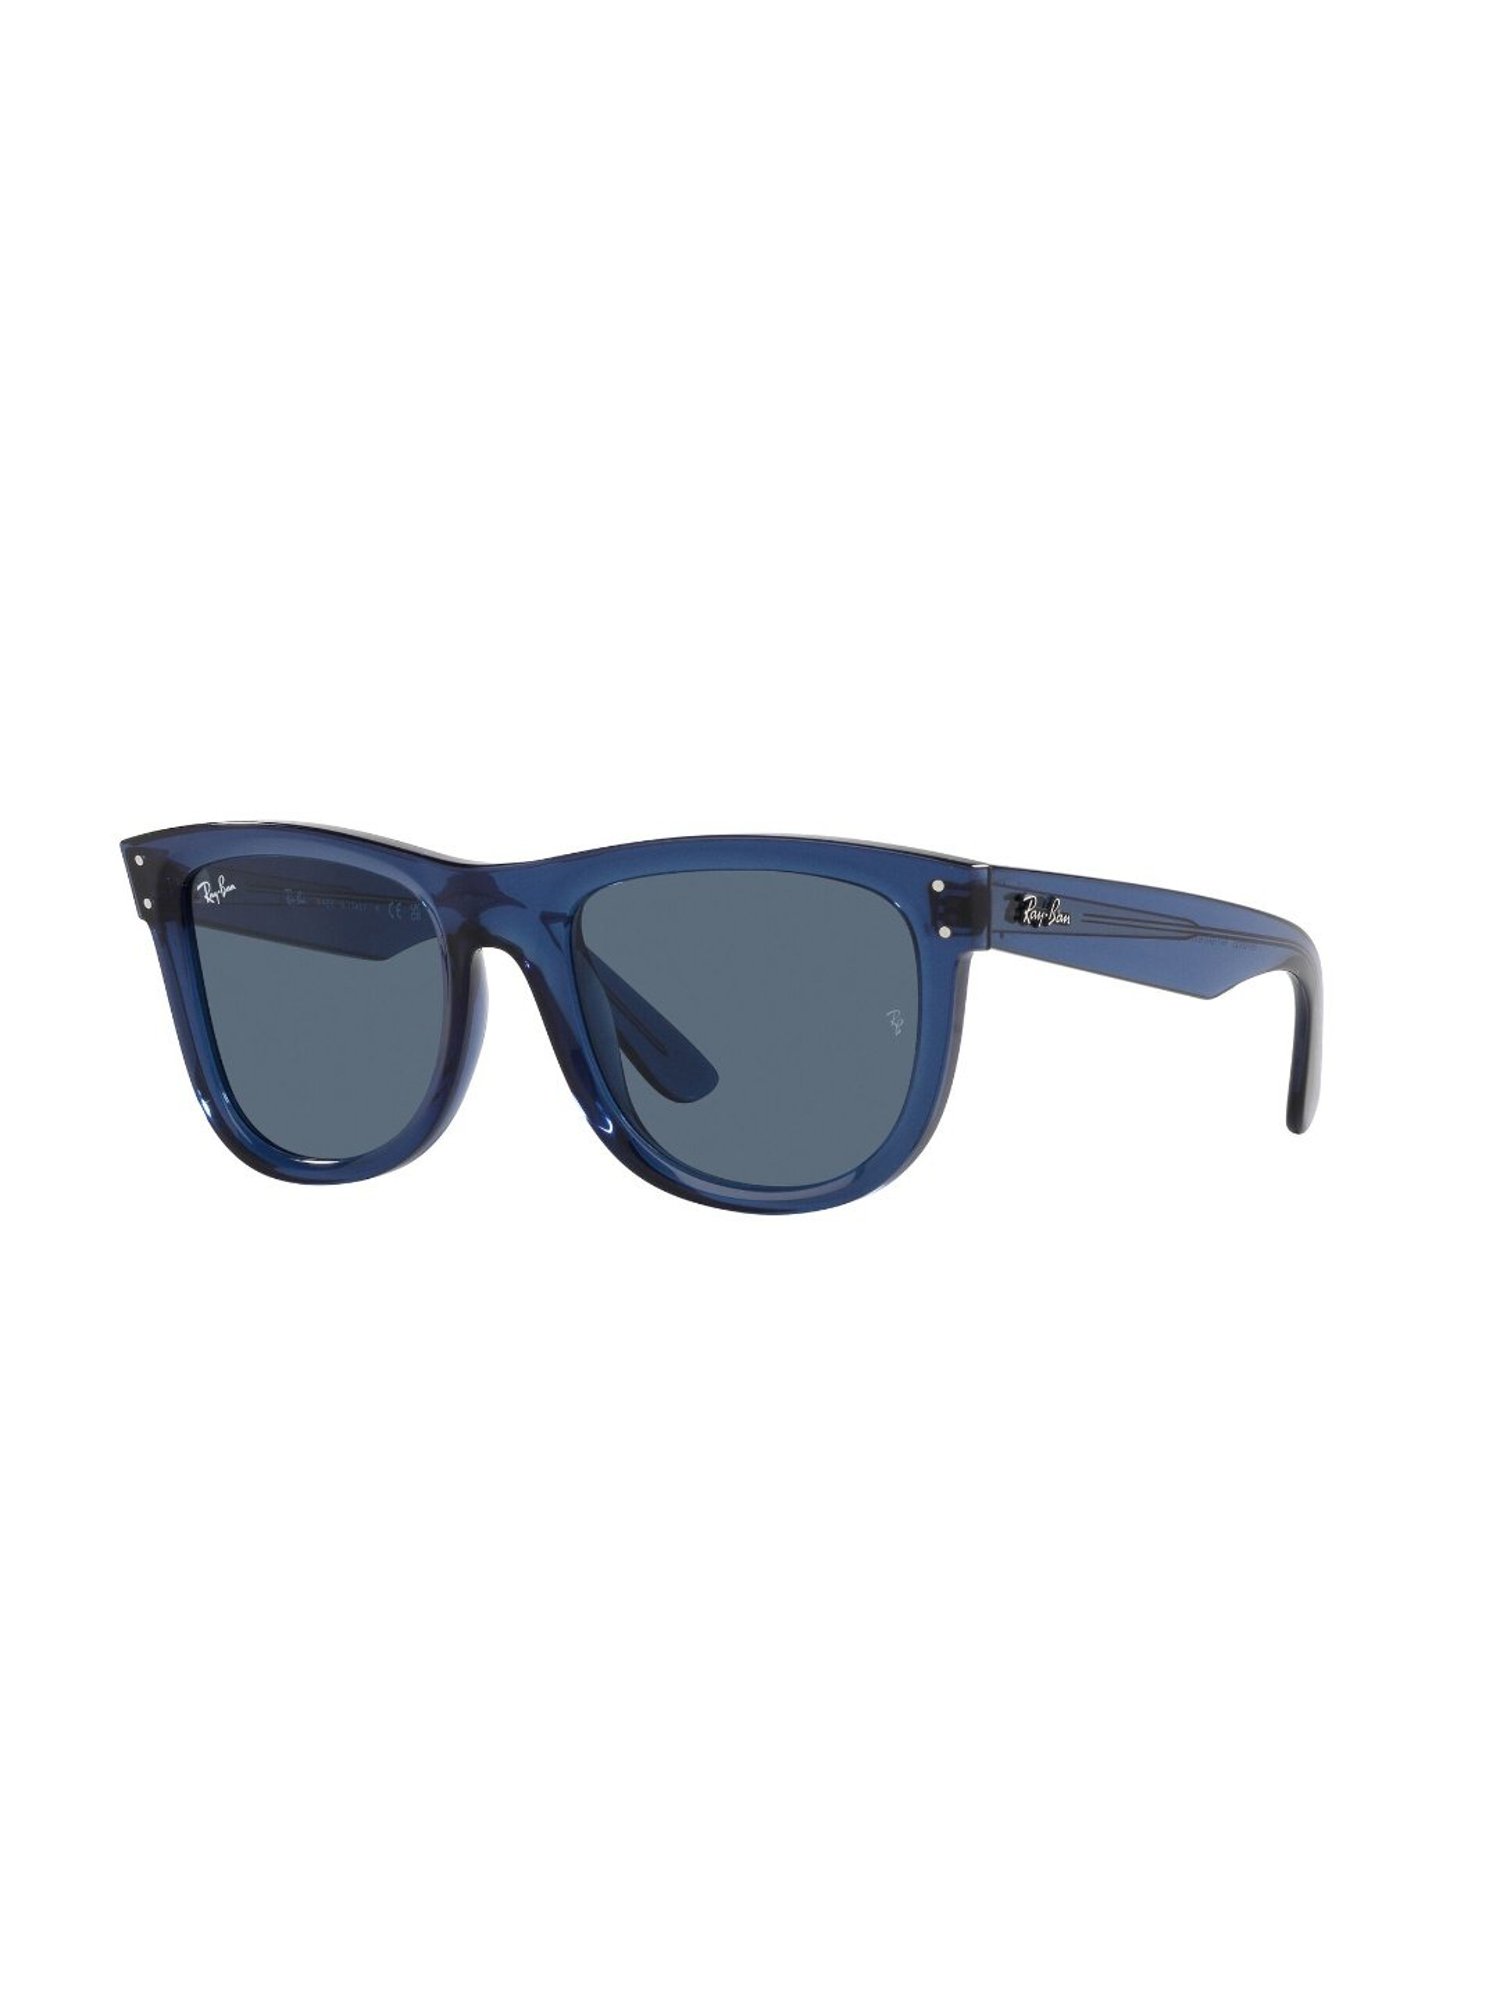 Tommy Hilfiger Men's Blue Sunglasses-Pack of 1-57 (TH Mark C3 57 S) :  Amazon.in: Fashion